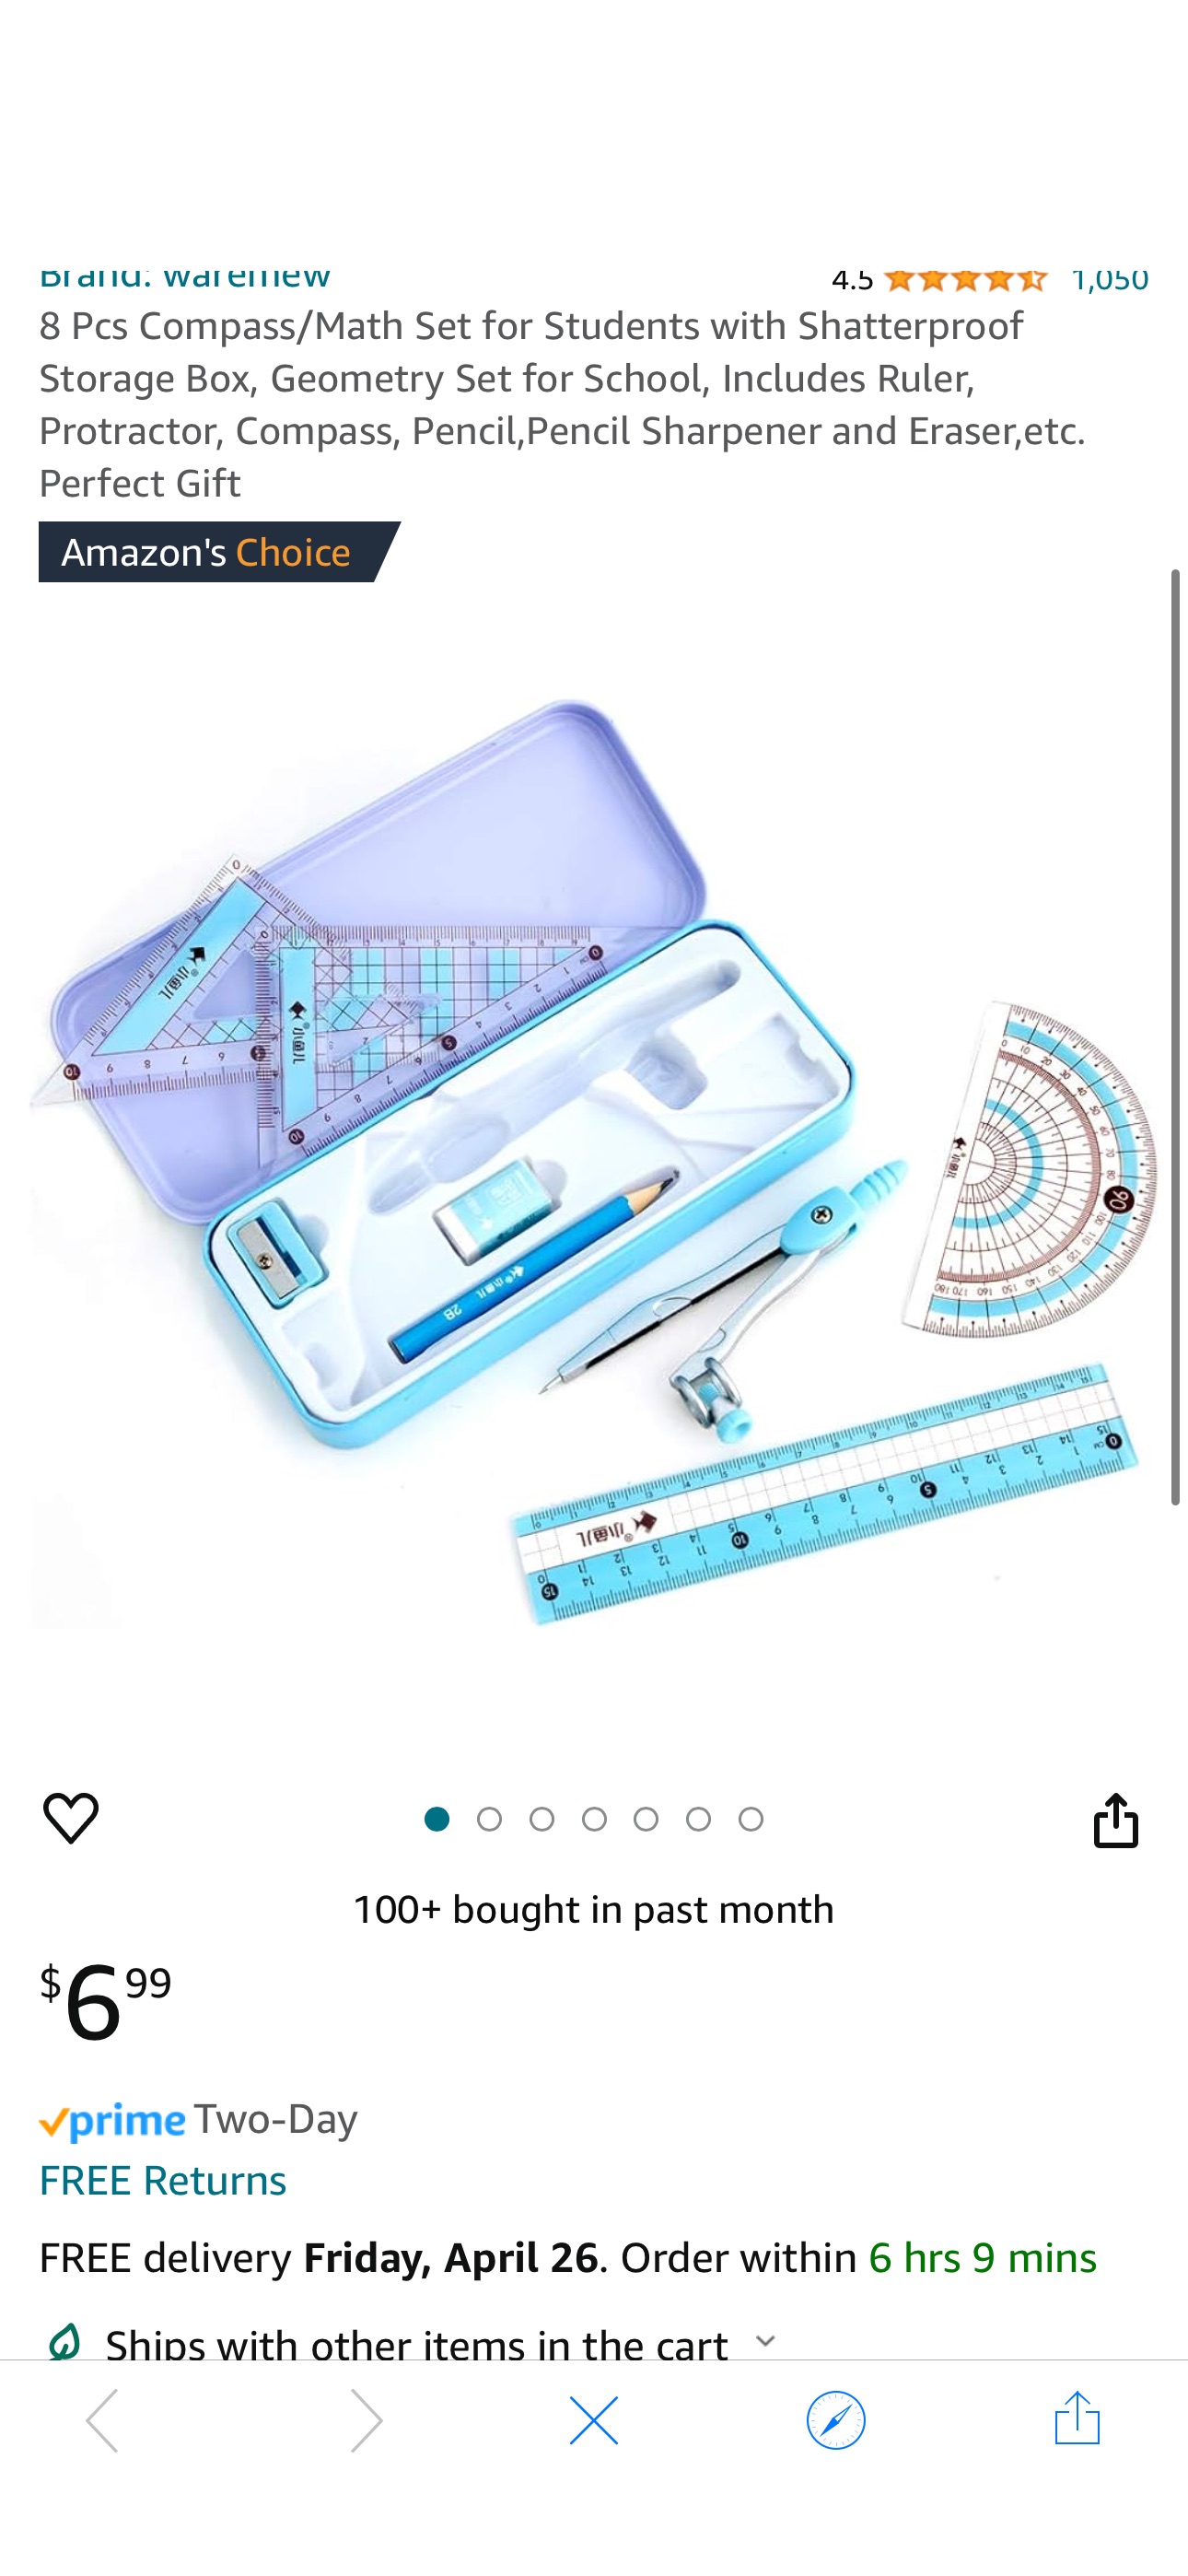 Amazon.com : waremew 8 Pcs Compass/Math Set for Students with Shatterproof Storage Box, Geometry Set for School, Includes Ruler, Protractor, Compass, Pencil,Pencil Sharpener and Eraser,etc. Perfect Gi